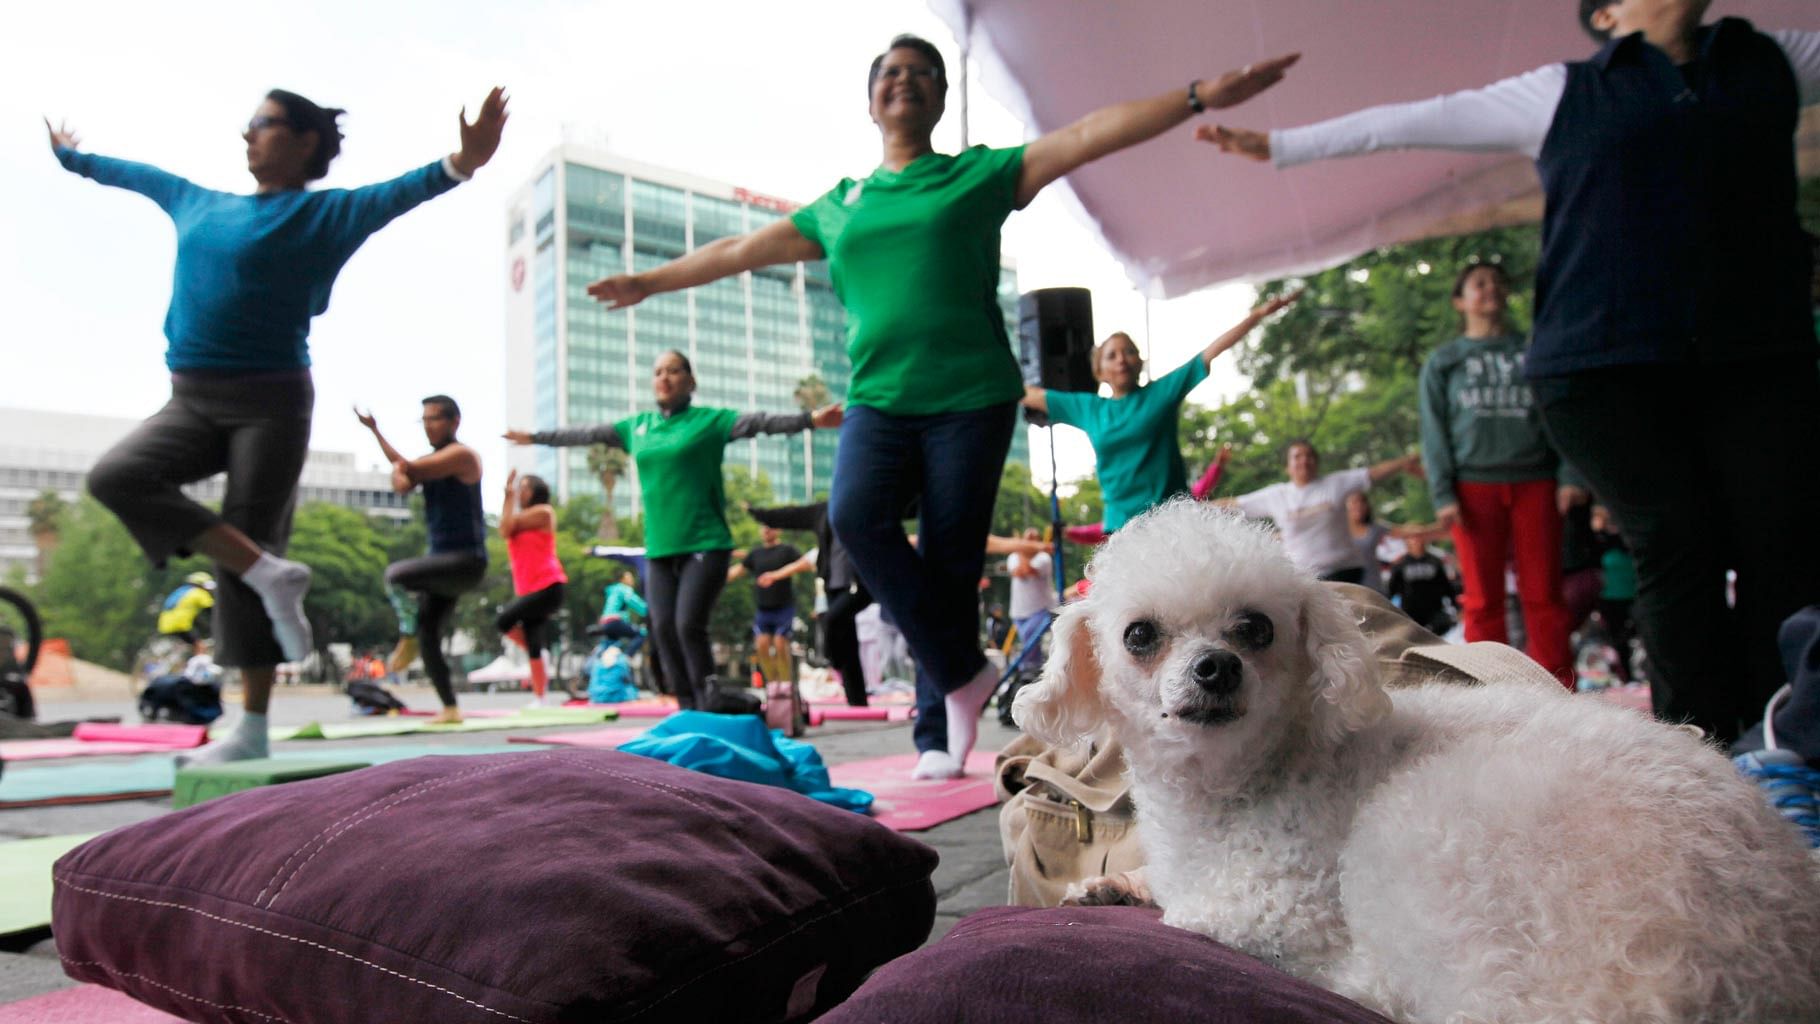 India is not the only country going crazy about International Yoga Day. (Photo: AP)